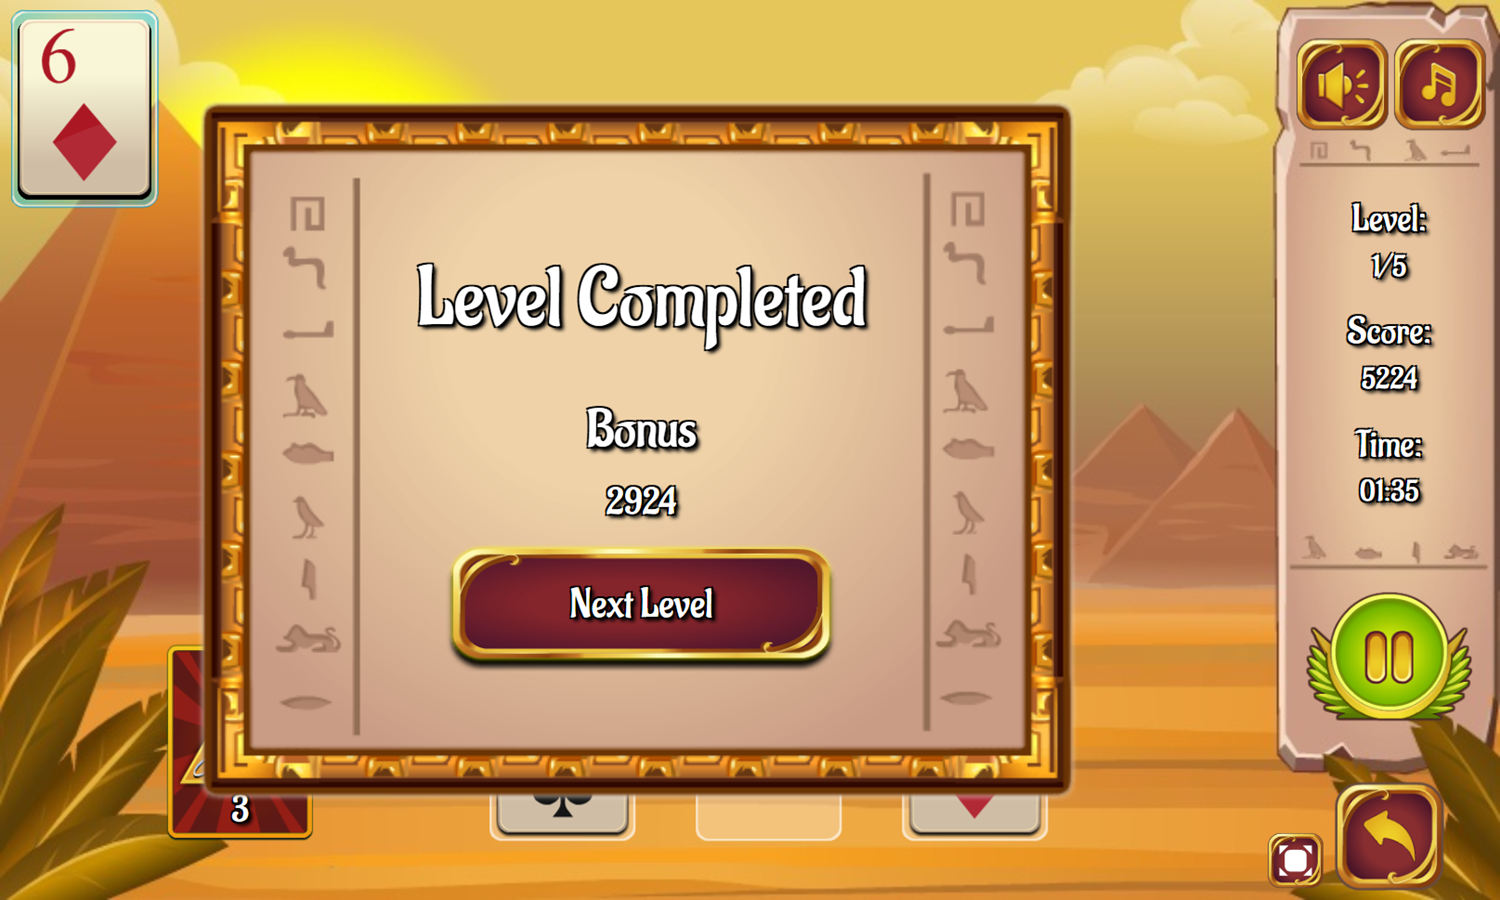 Pyramid Klondike Solitaire Game Level Completed Screenshot.